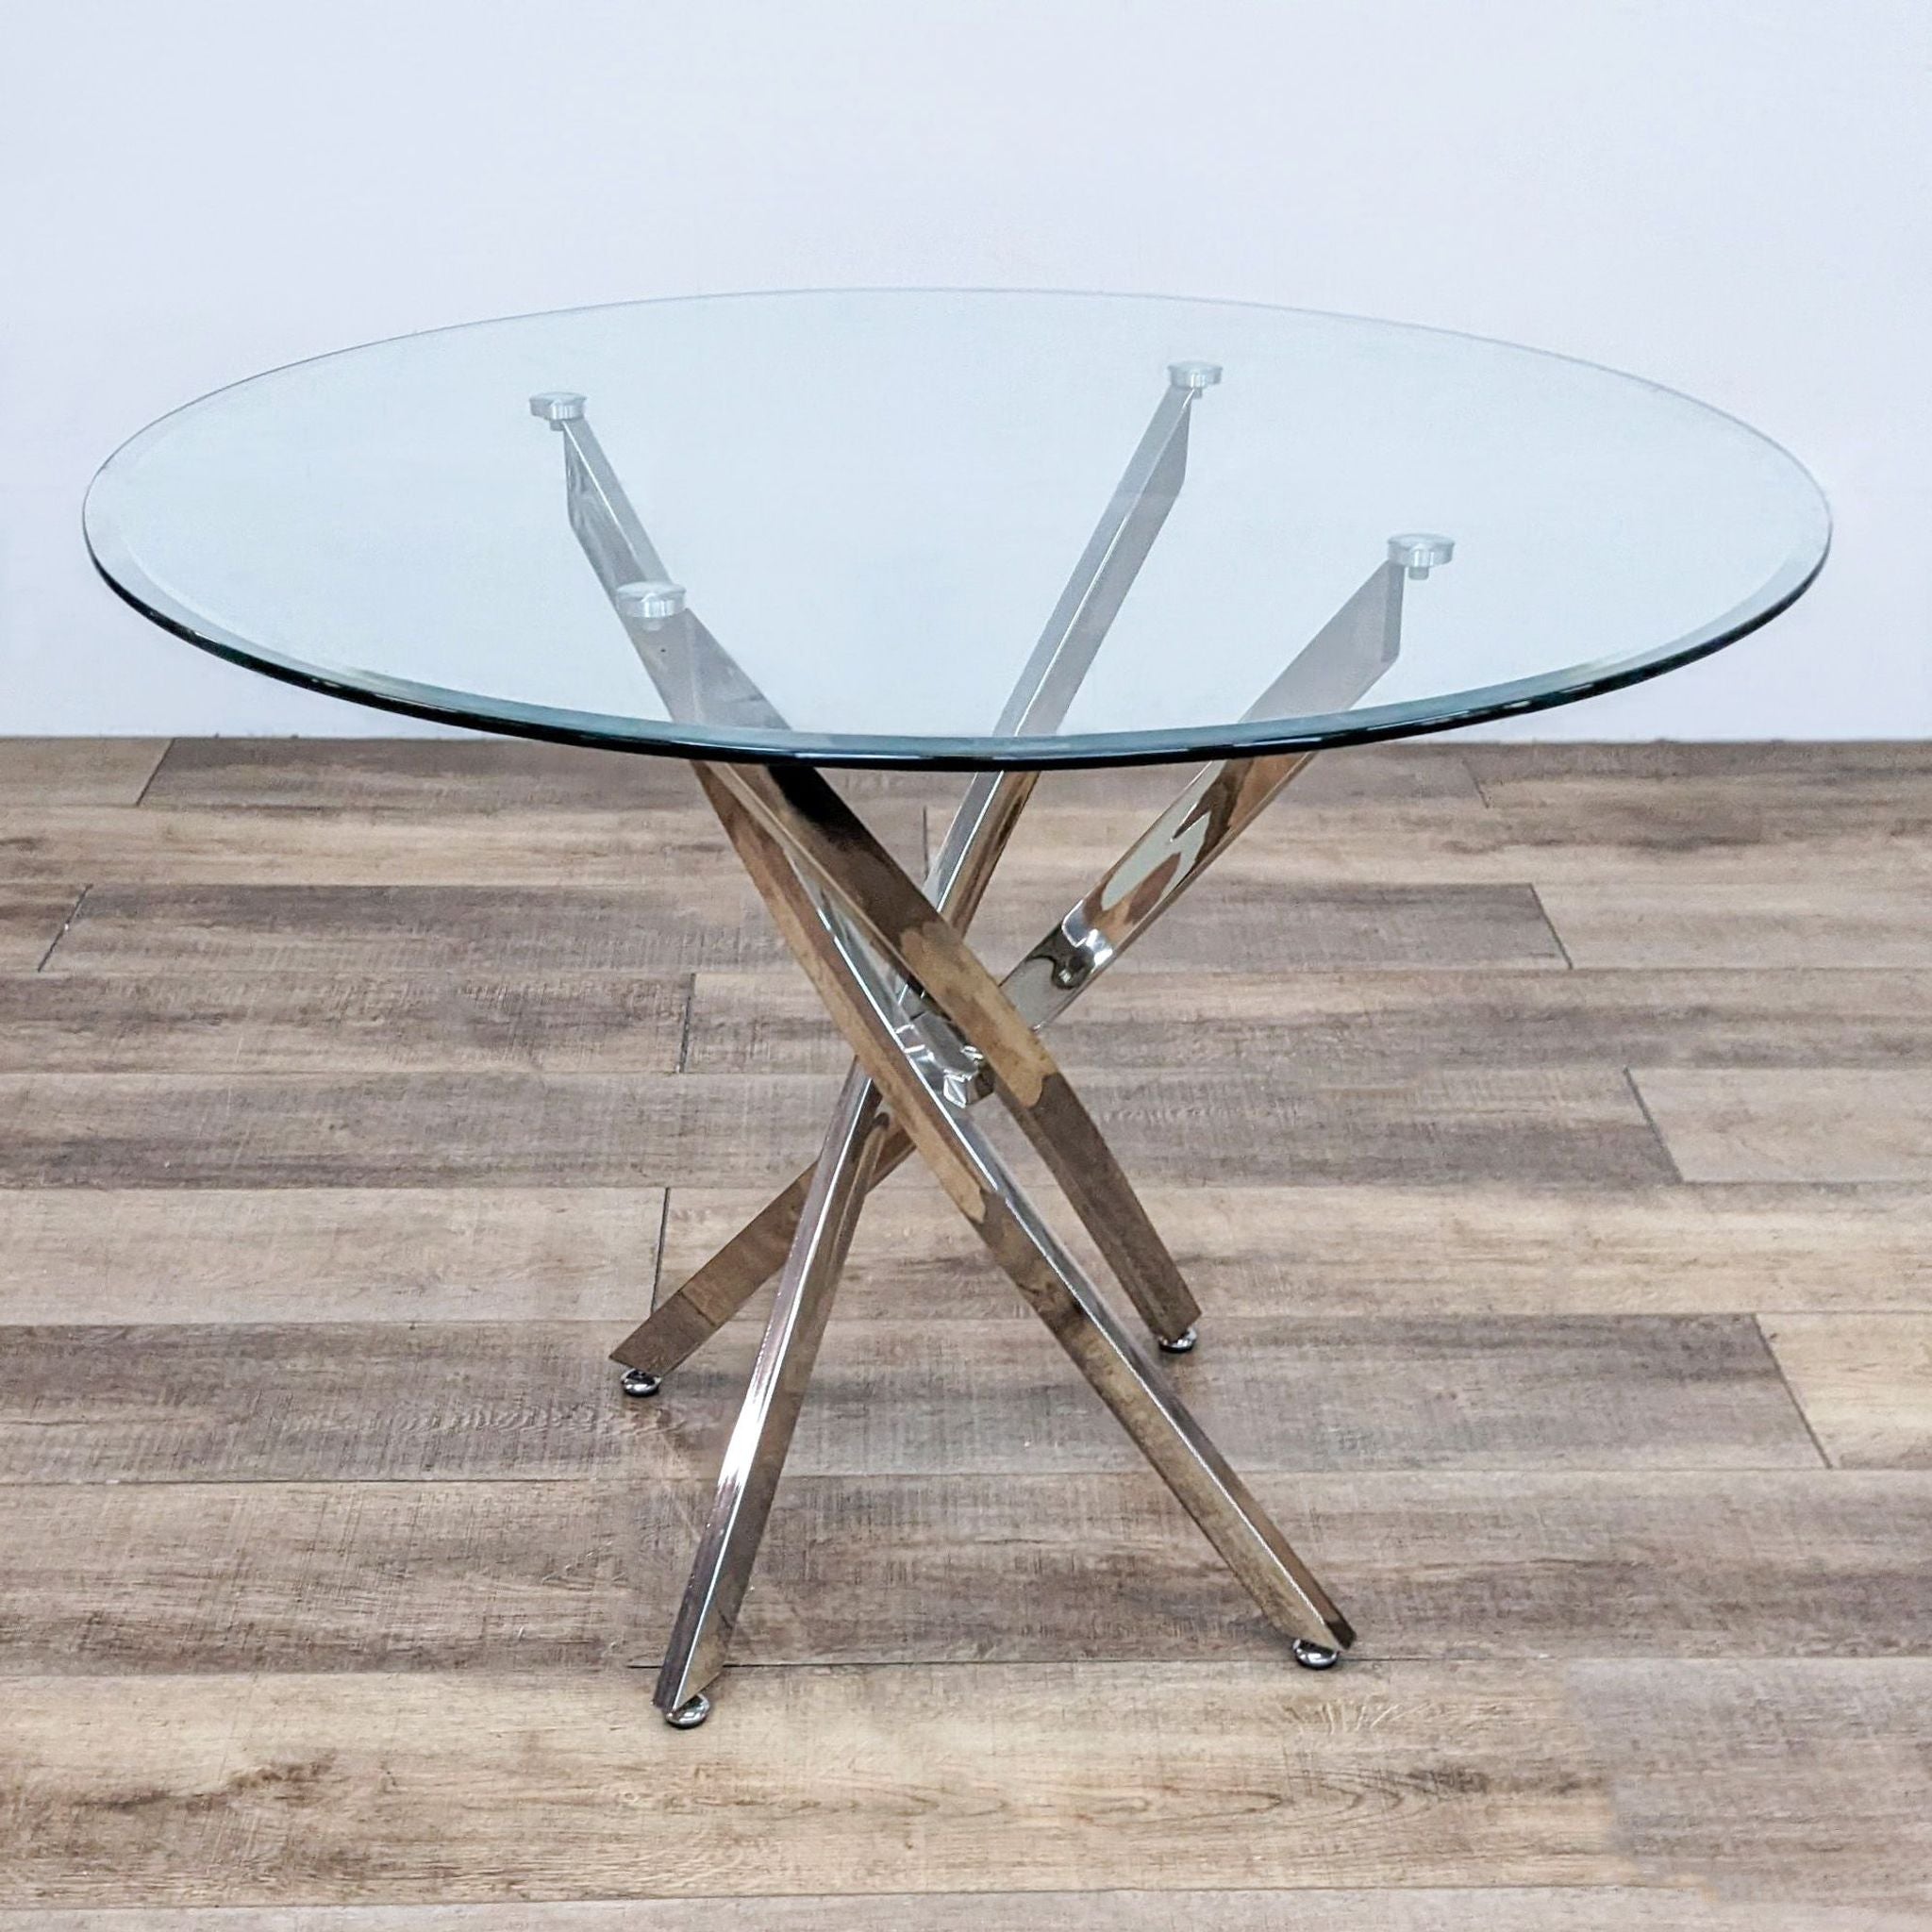 Reperch brand modern dining table with a thick clear tempered glass top and gleaming metal base with angled, slanted posts on a wooden floor.